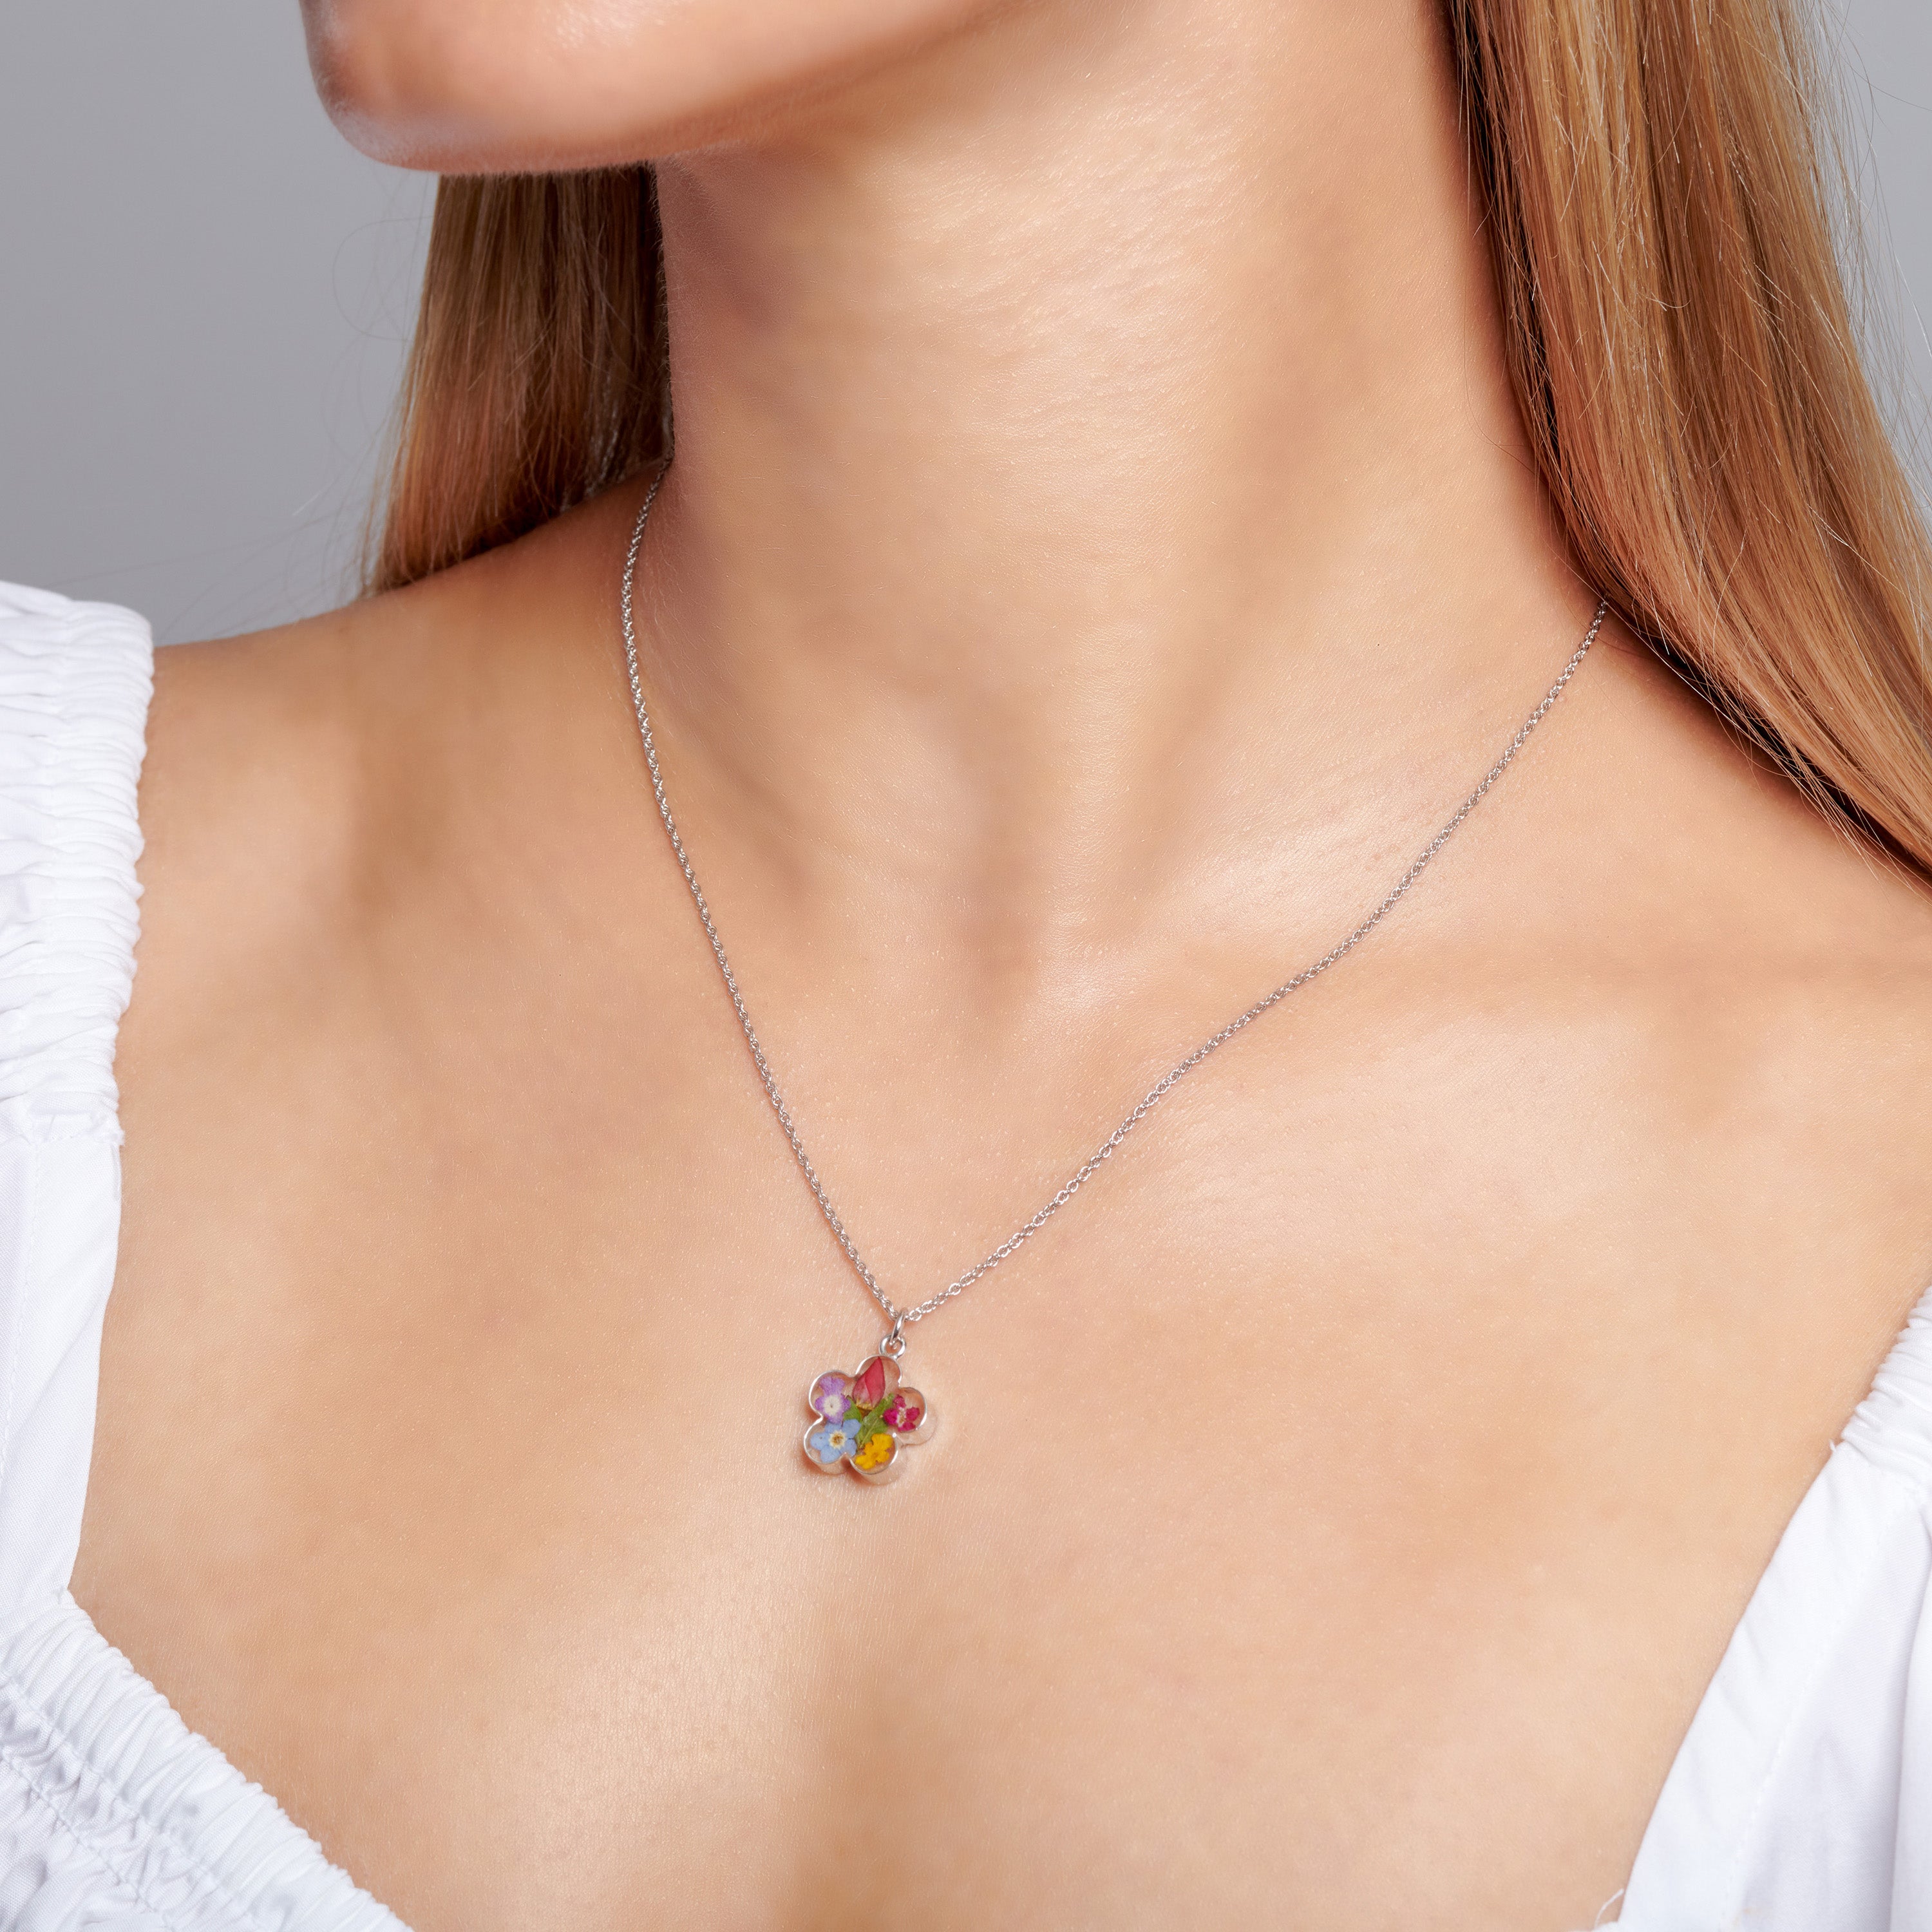 Dira Necklace with Multi Colored Flowers